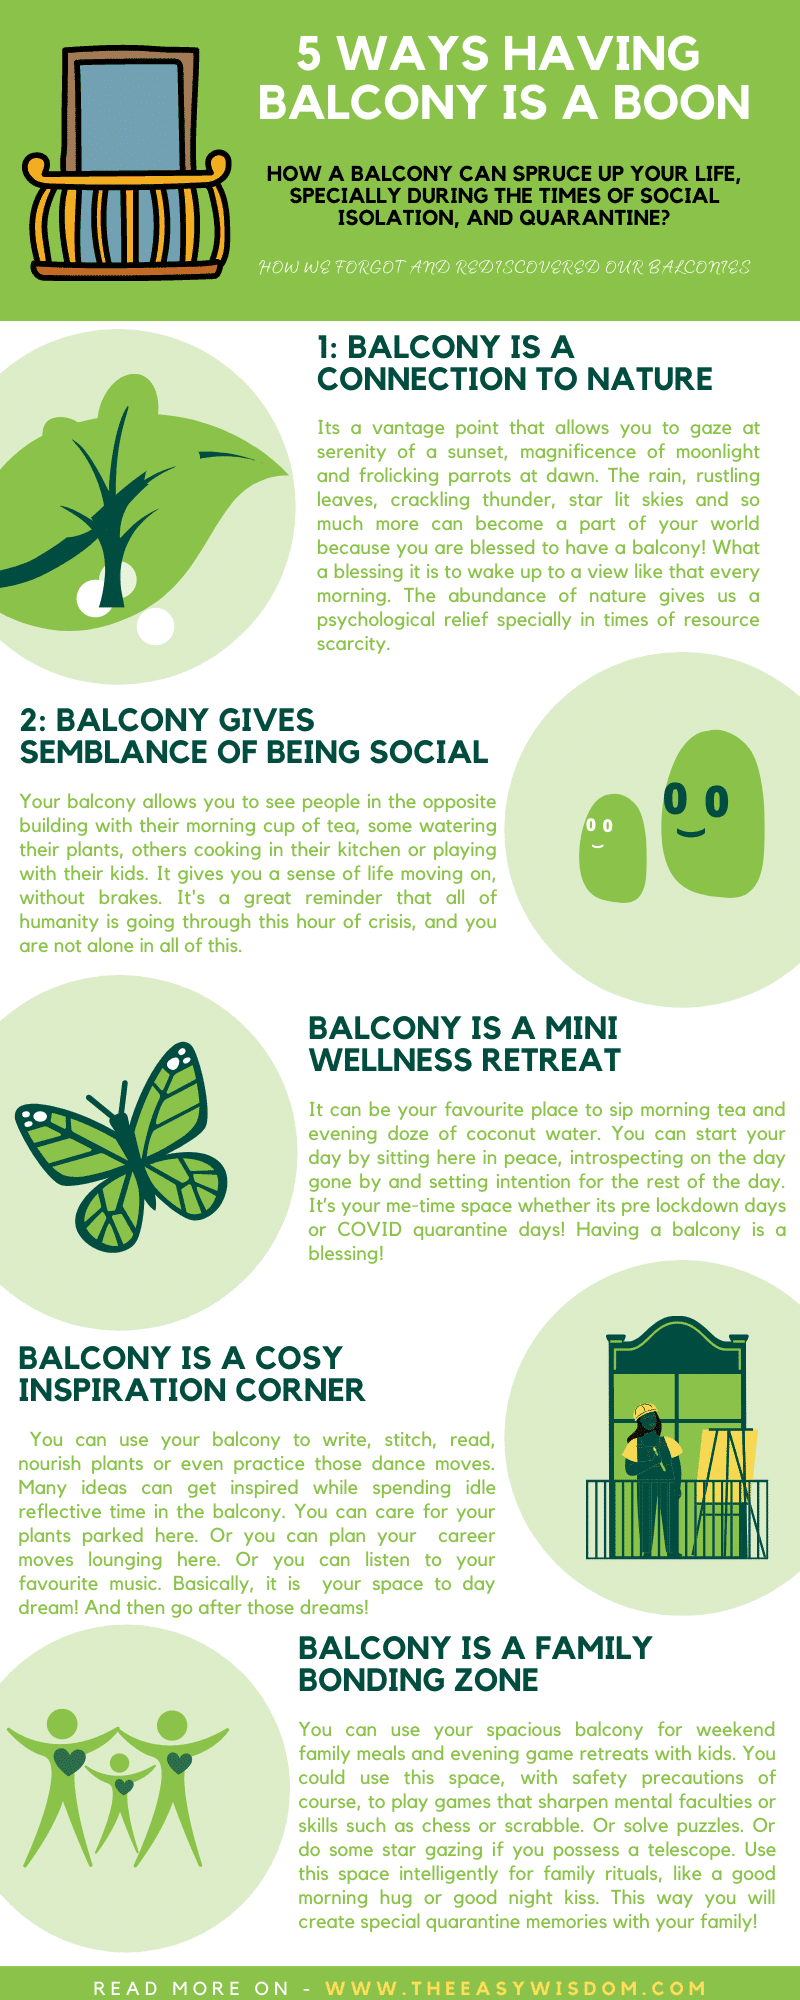 Why Balcony is Important? 5 Benefits of Having a Balcony- The Easy Wisdom (www.theeasywisdom.com)